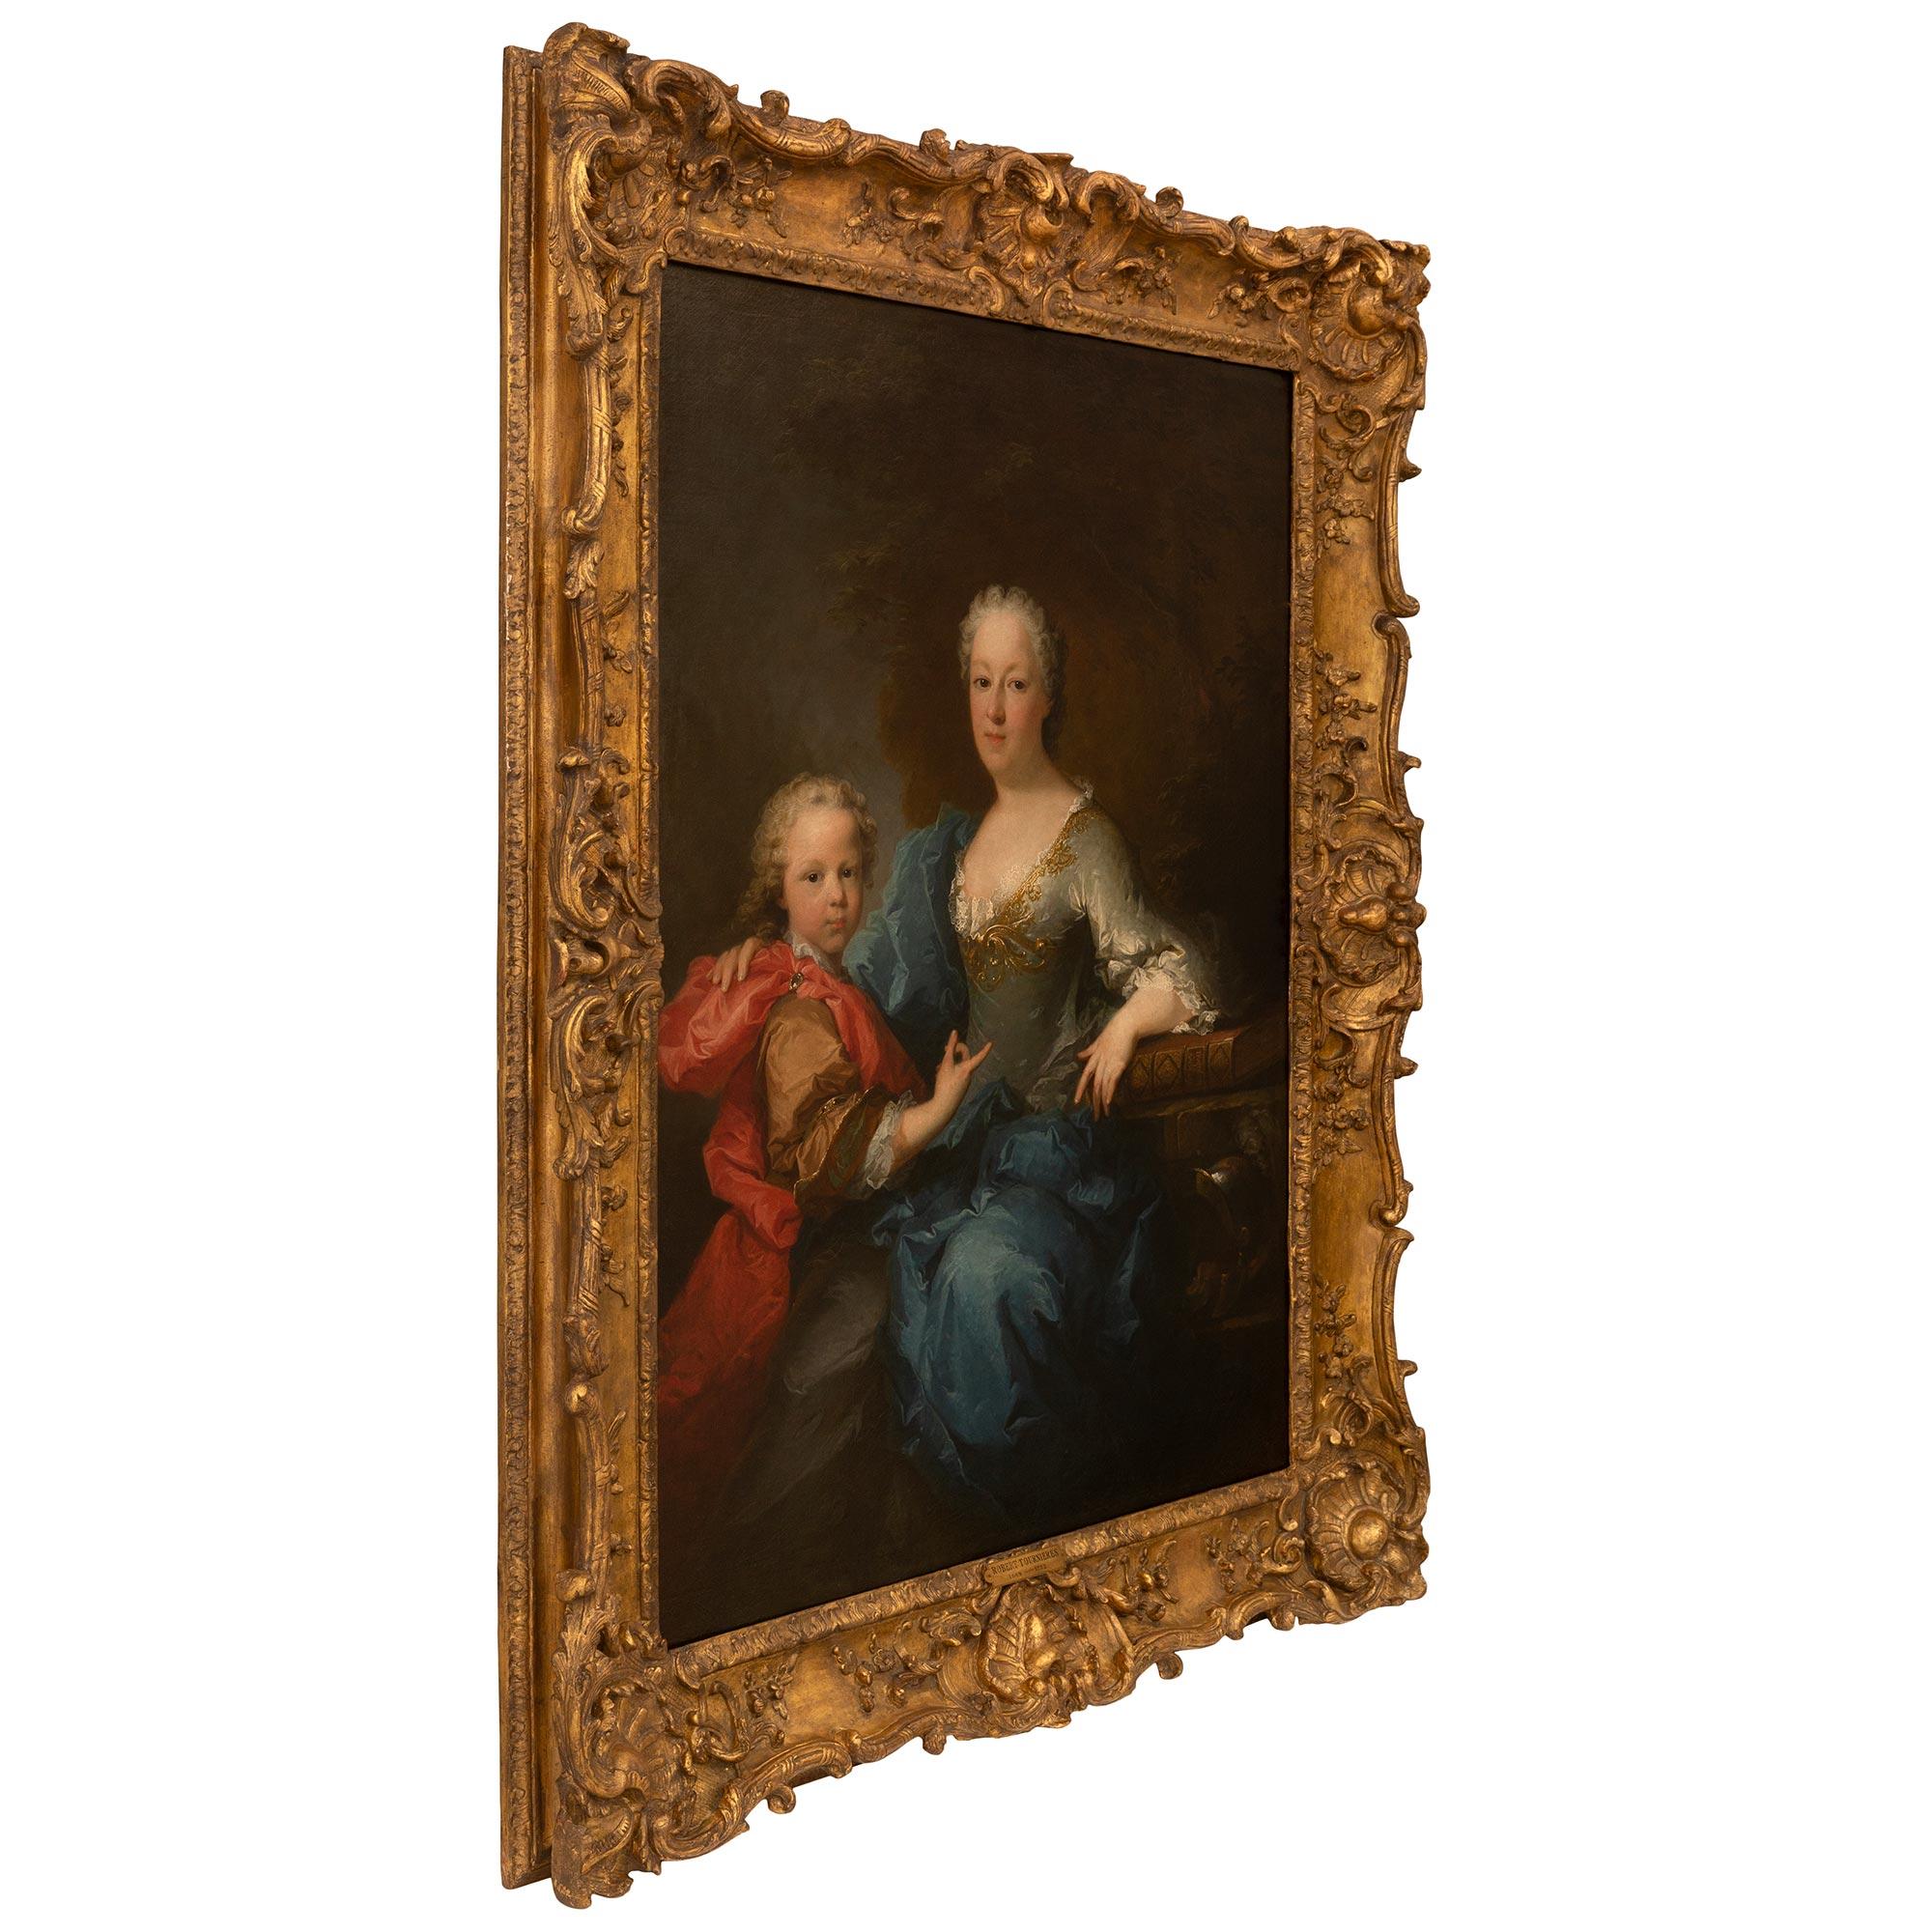 A wonderful French 18th century Oil on Canvas and Giltwood painting of a mother and son by Robert Le Vrac de Tournières. The painting is framed within a richly carved giltwood frame with stunning seashell reserves at the center and at each corner.